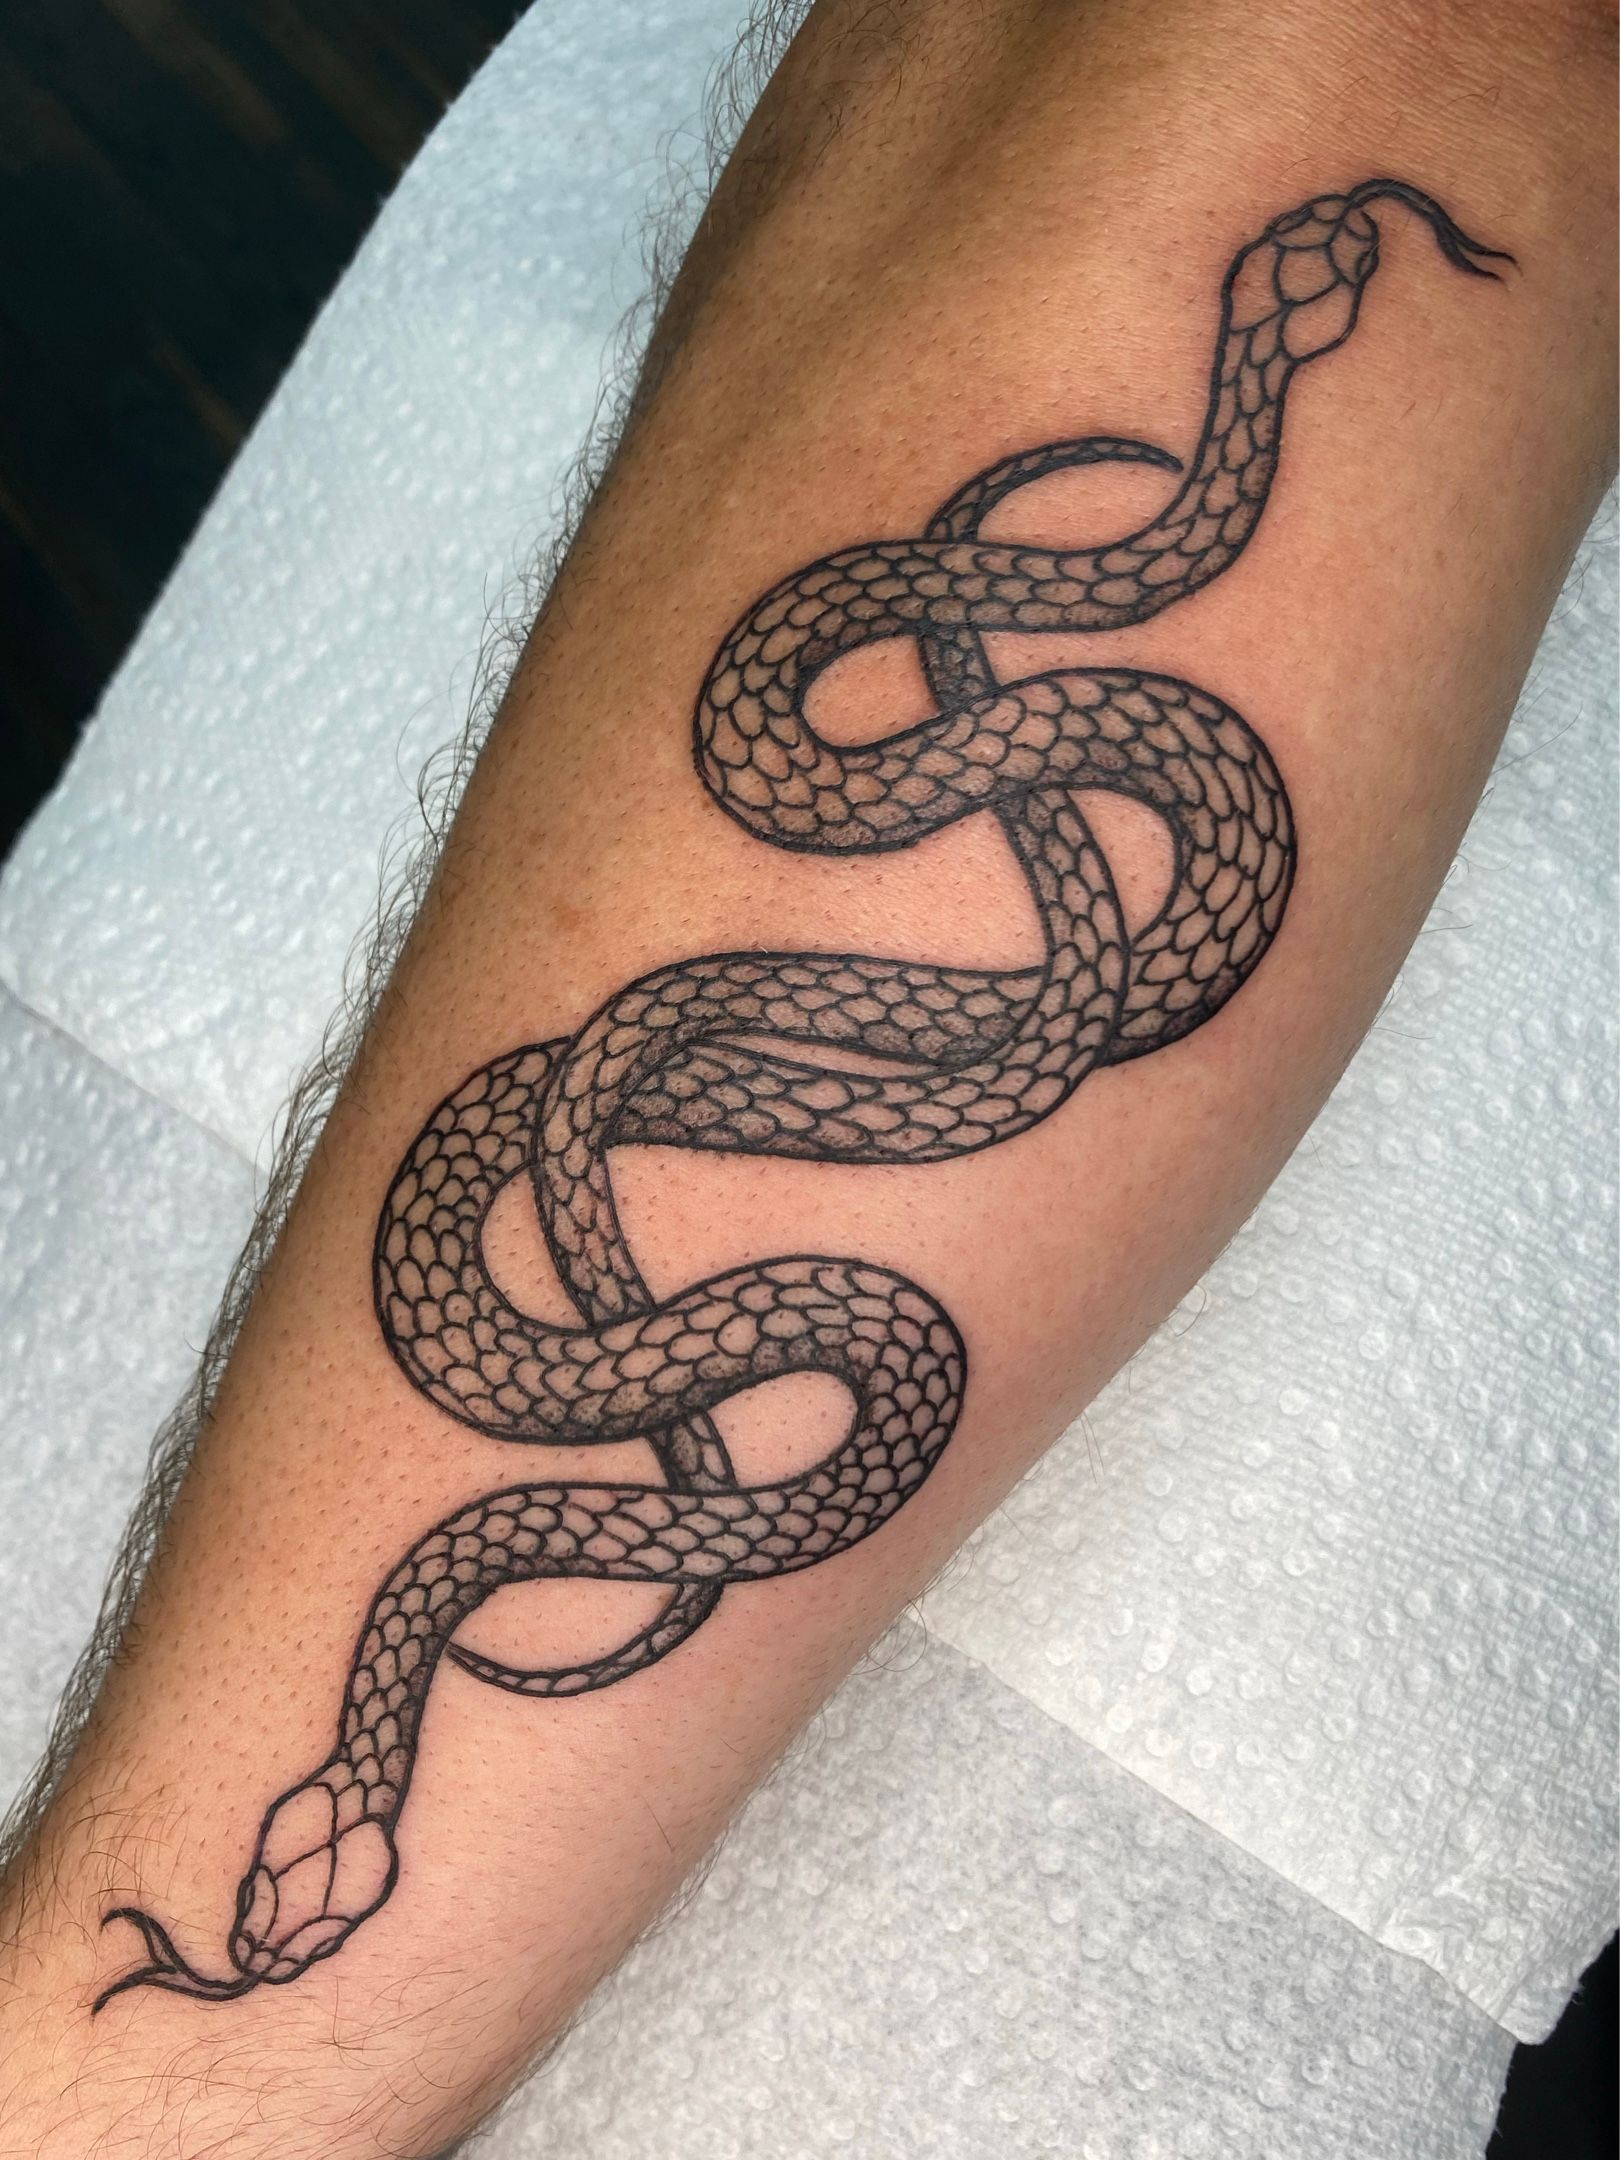 Double headed snake and dagger for @itsnotabigdeal__ thanks love ❤️ |  Instagram